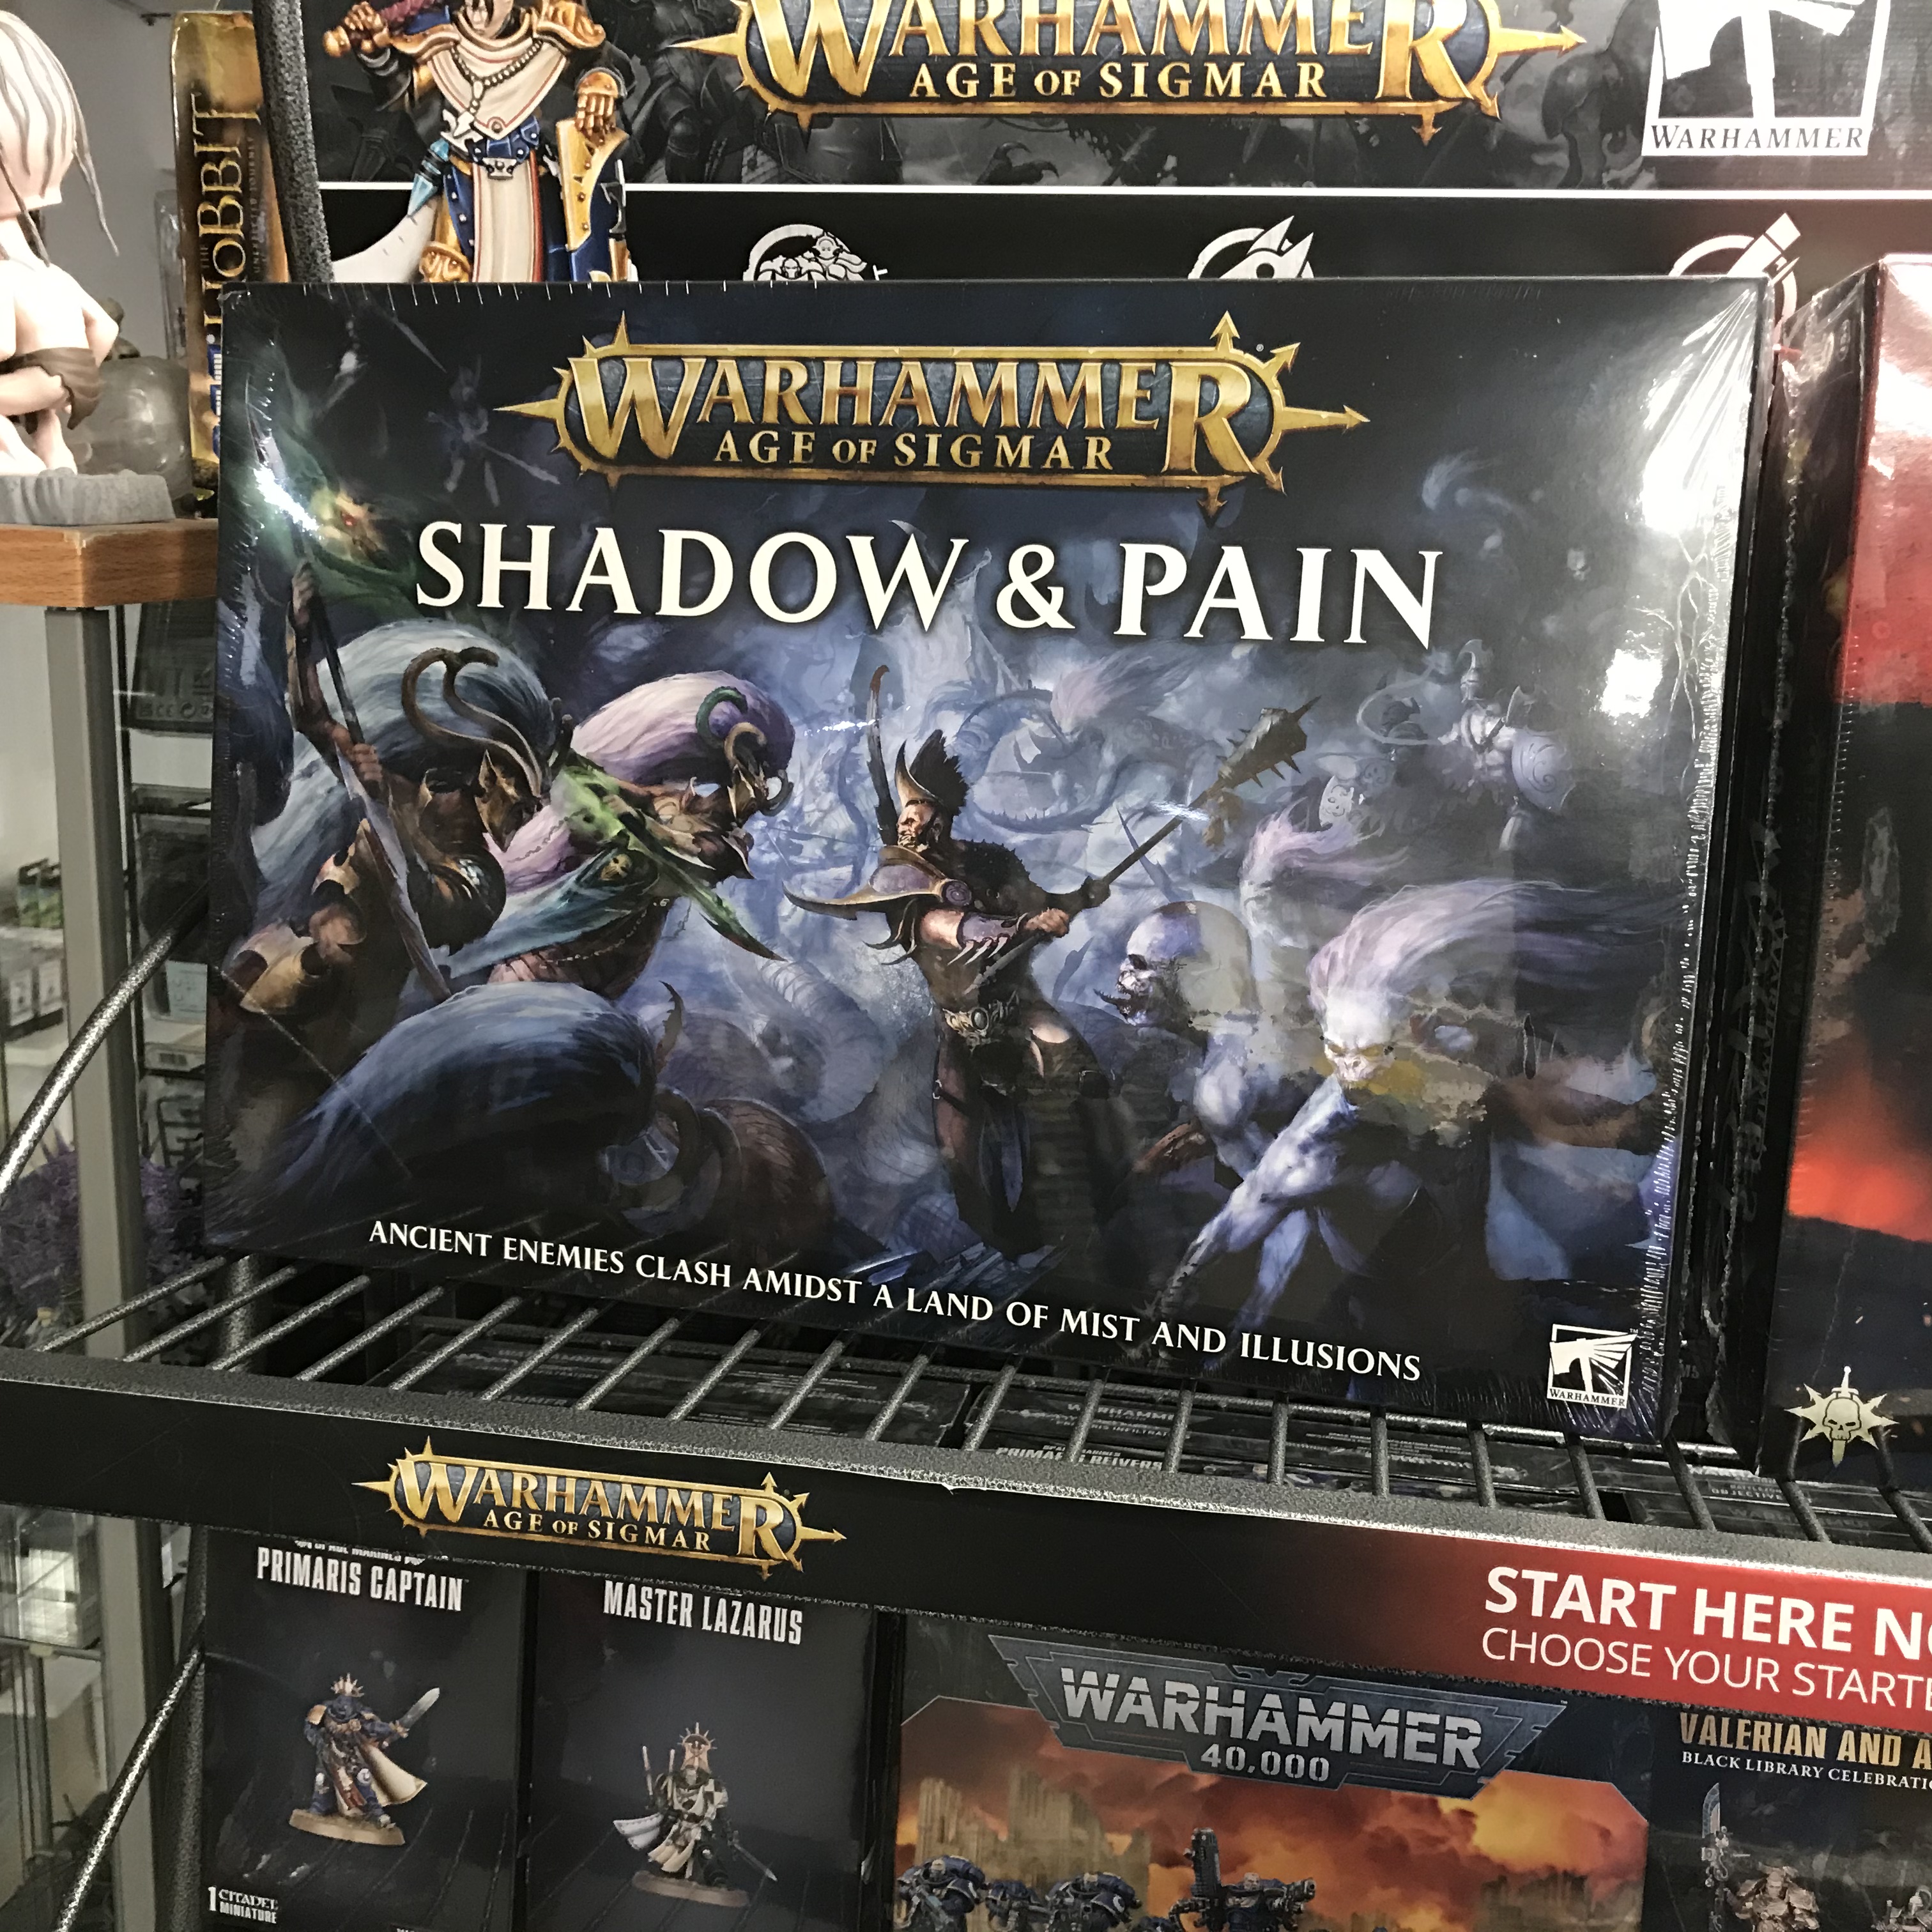 New Age of Sigmar and Space Marine Heroes!